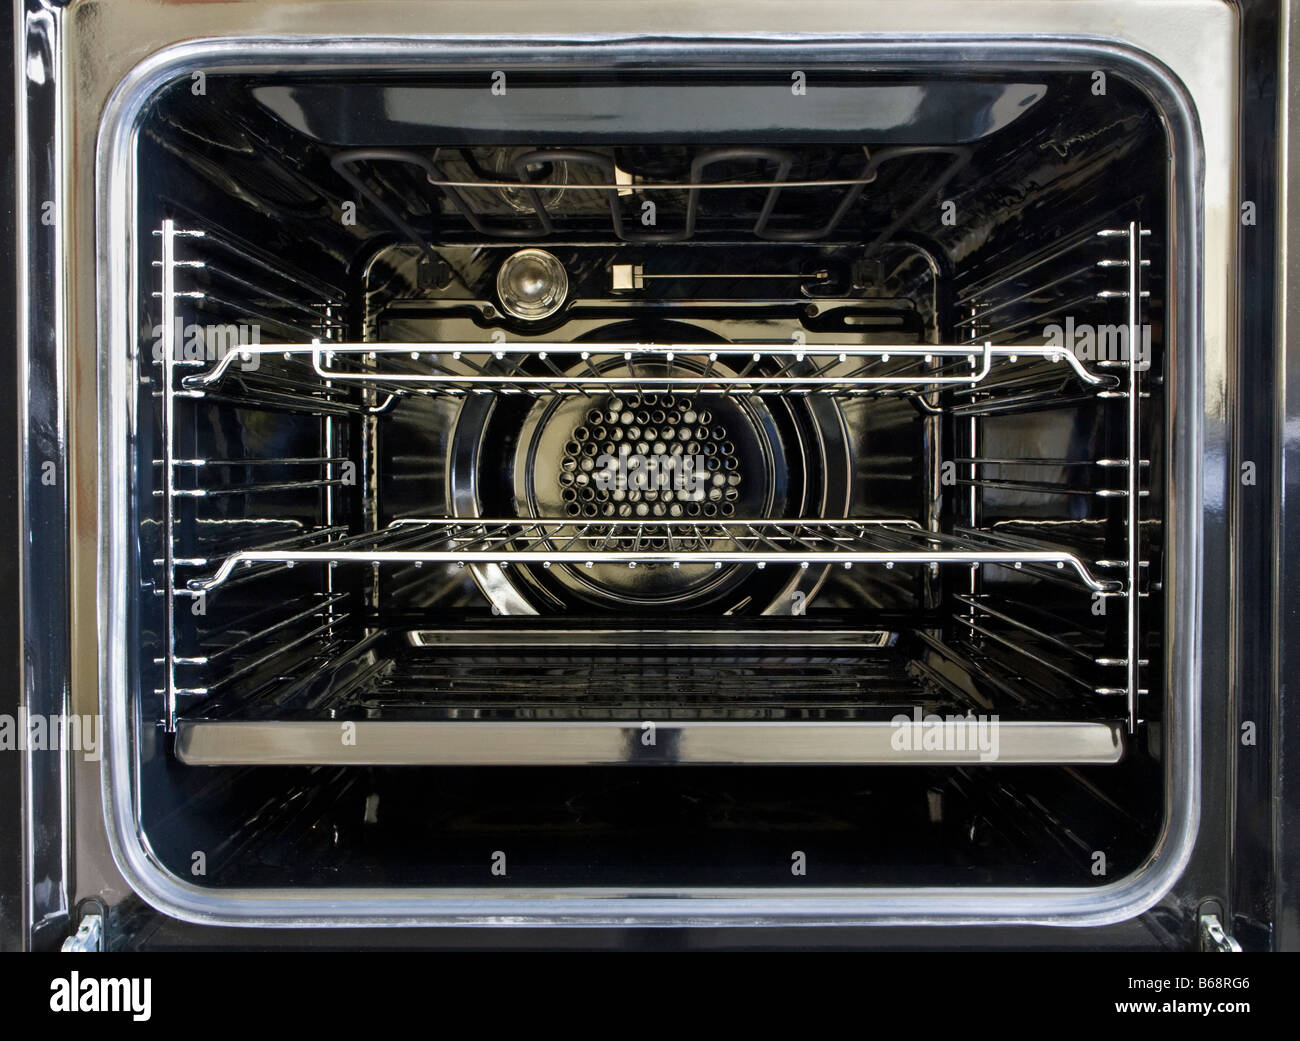 The inside of a new electric oven Stock Photo